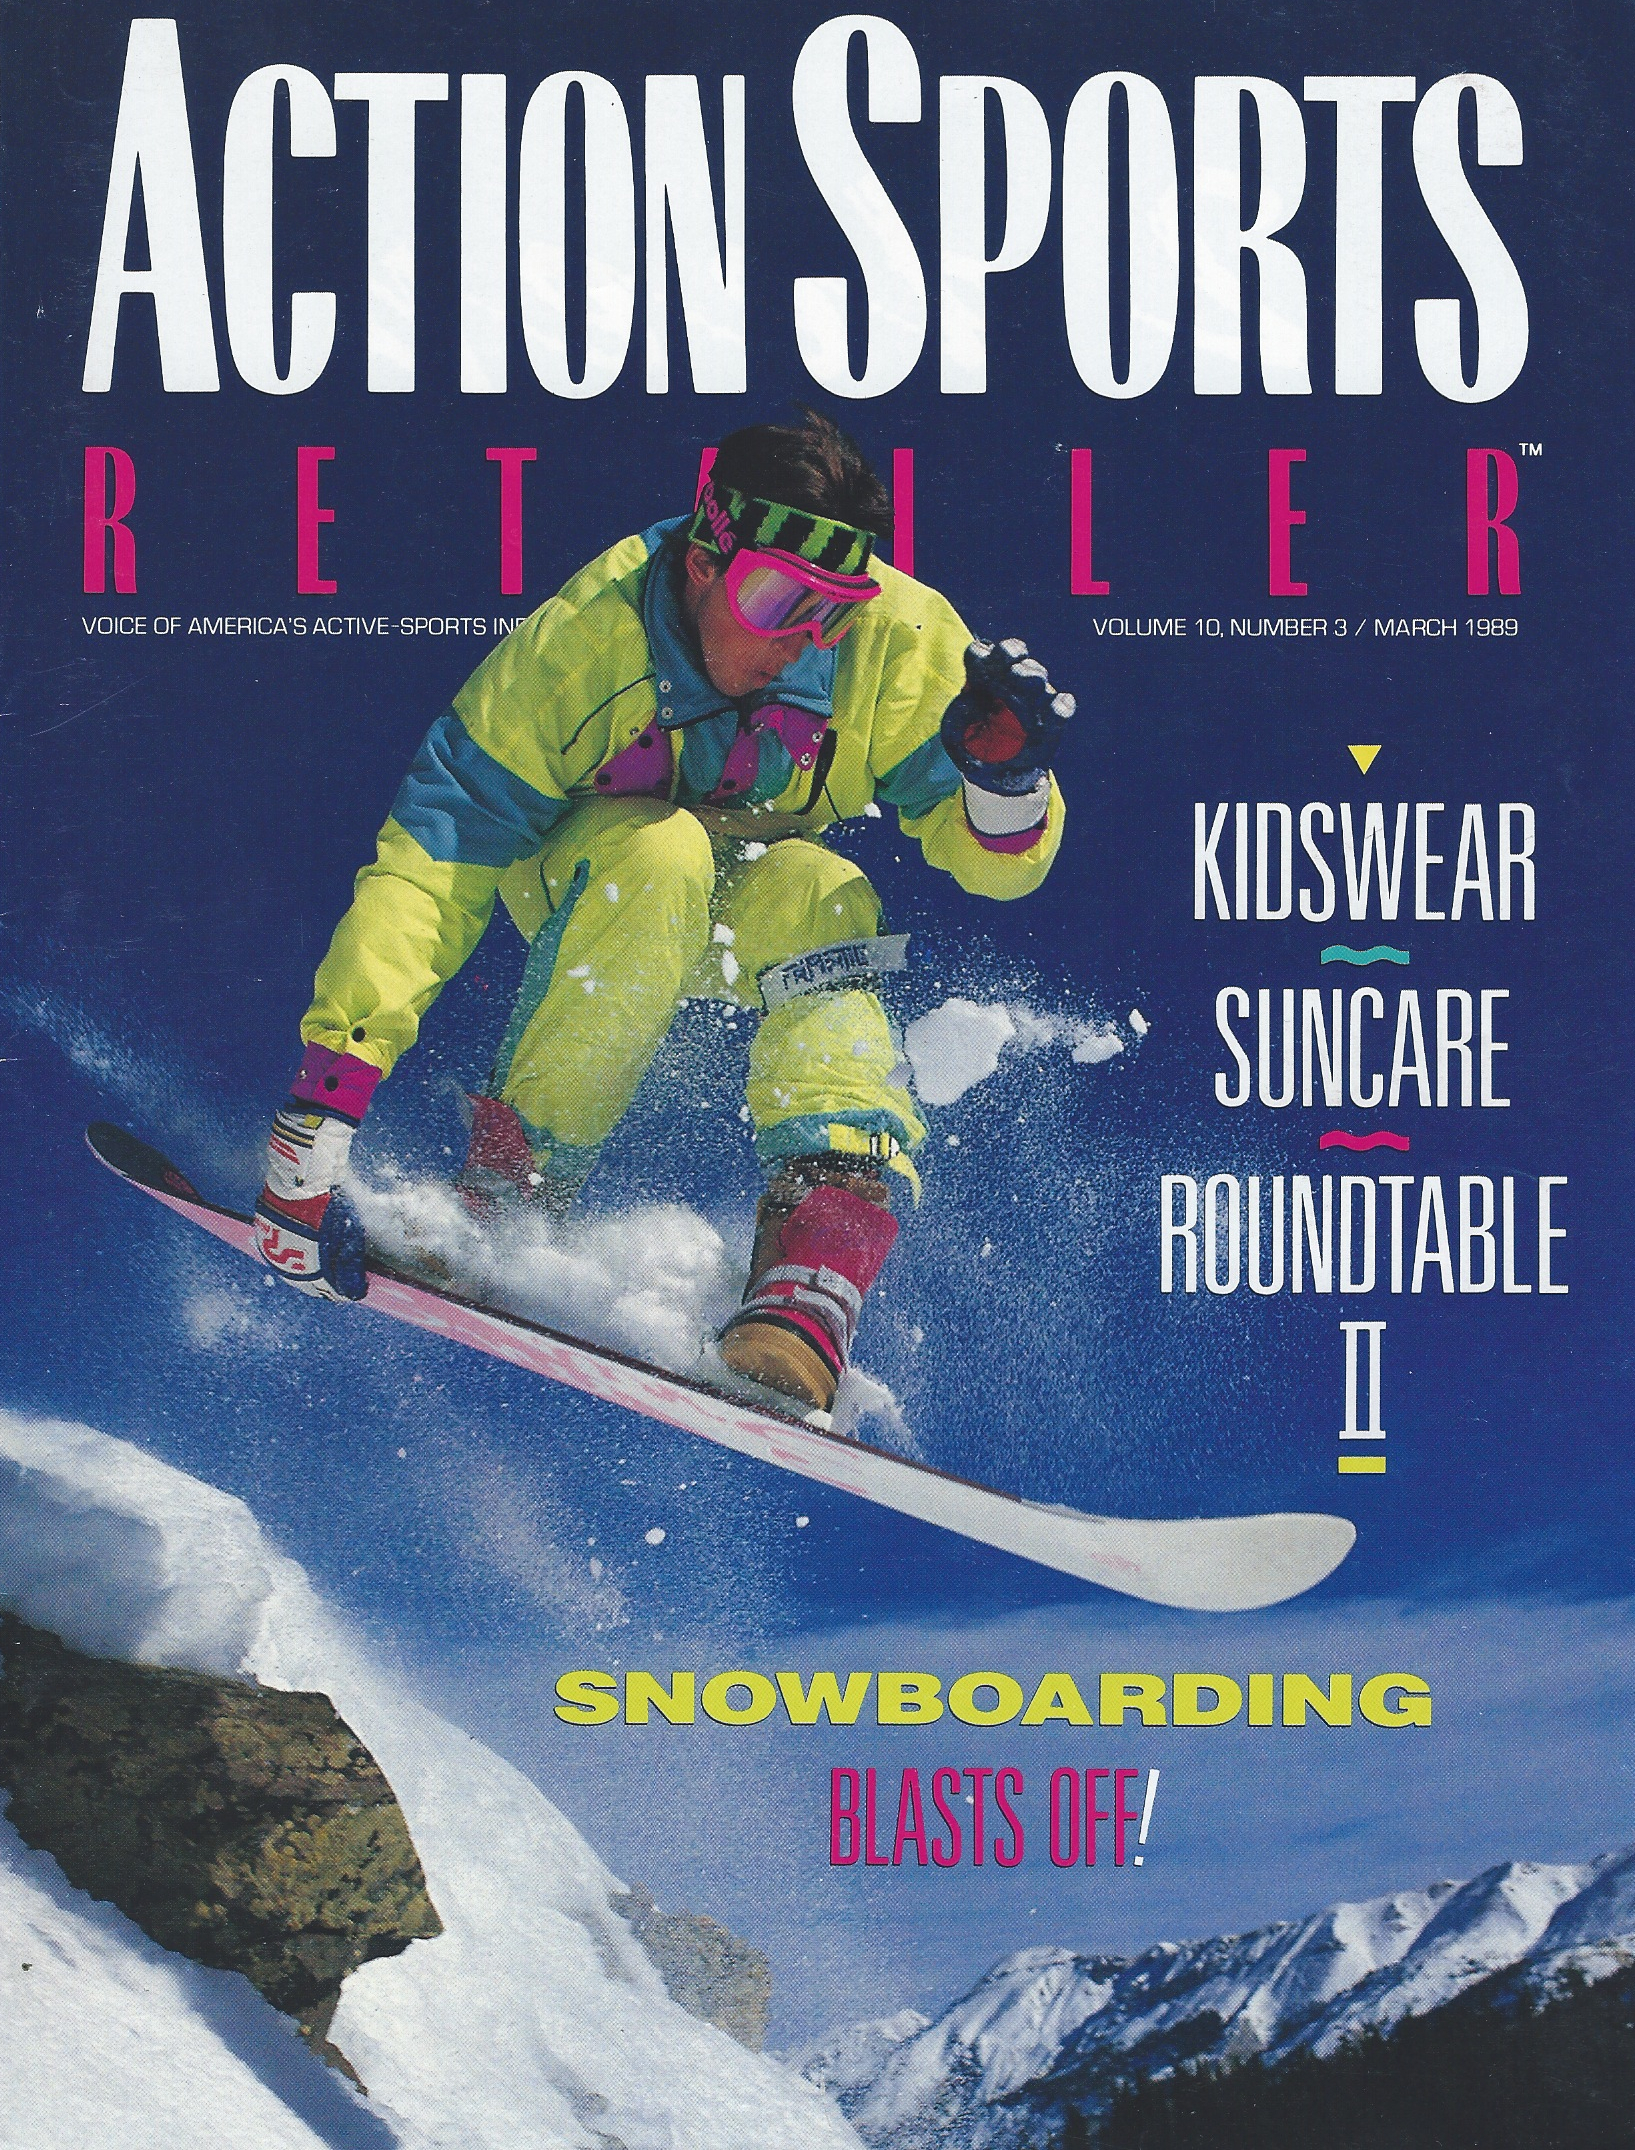 Action Sports Cover.jpg